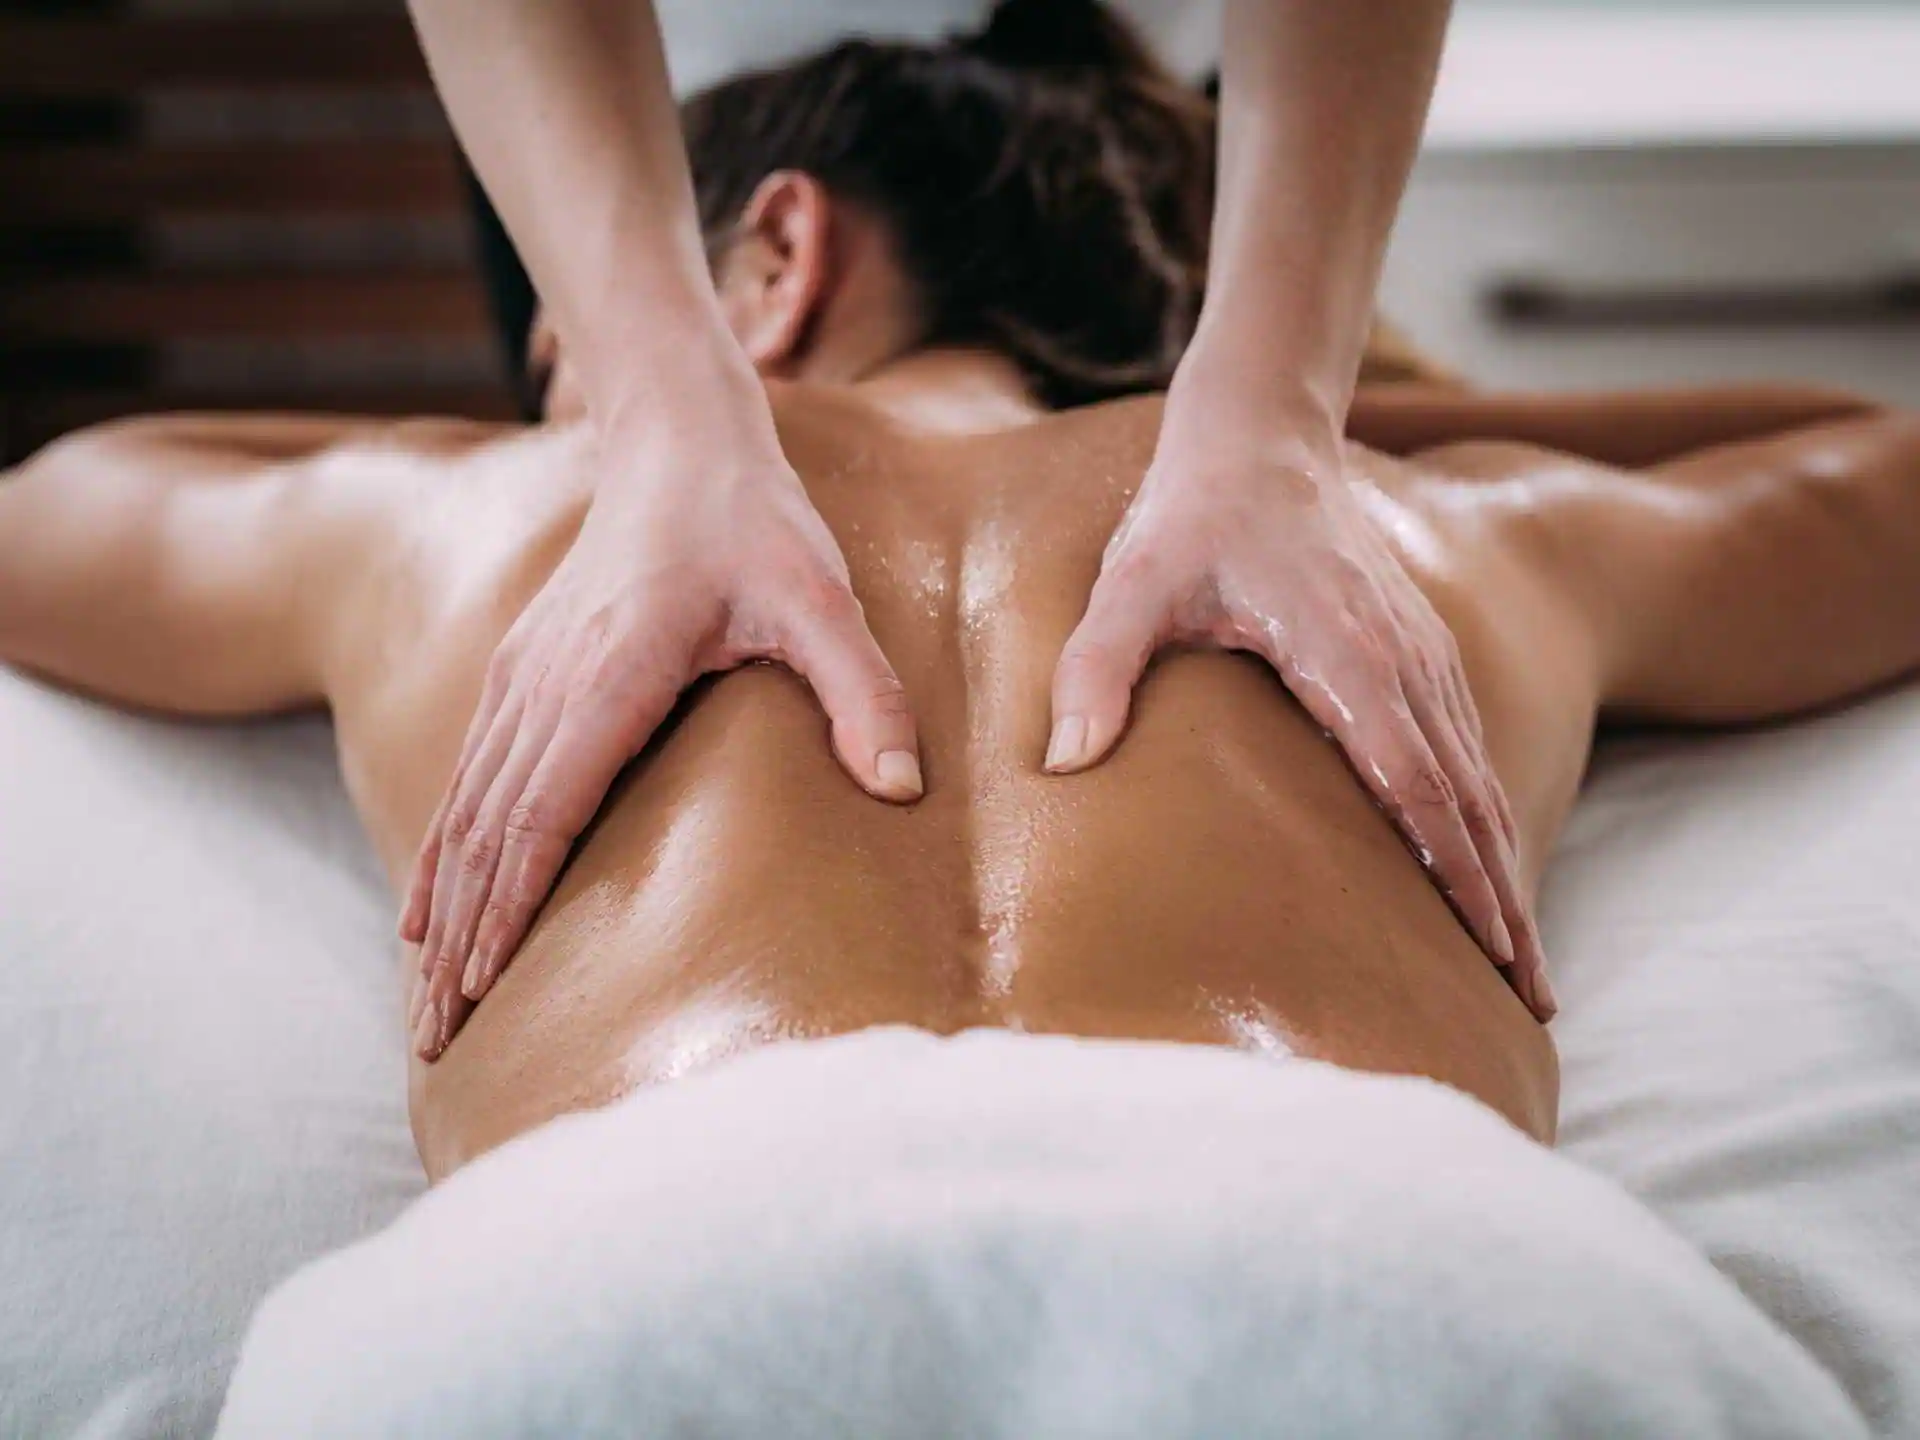 Krysis Health Club in Costa Rica, North America | Massage Parlors,Red Light Places - Rated 1